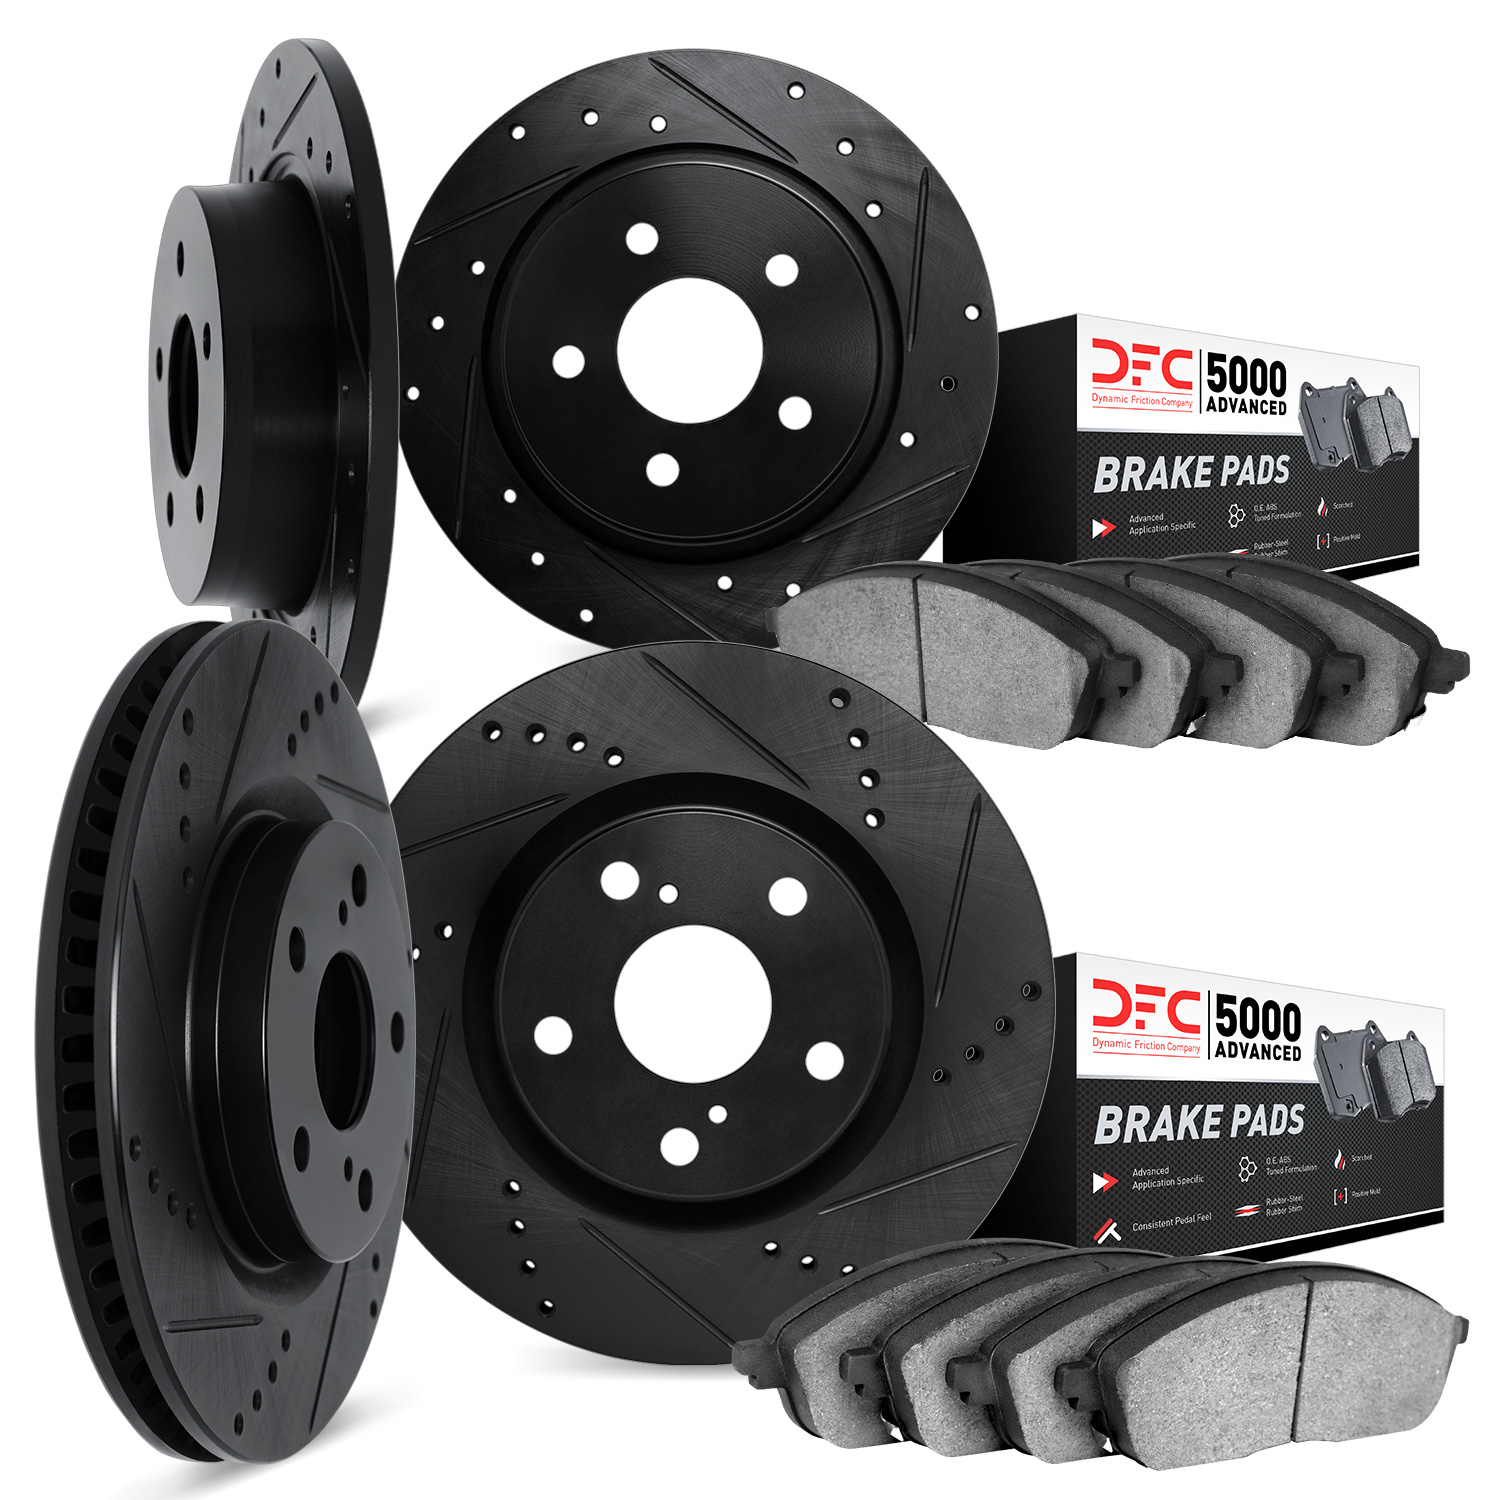 8504-74067 Drilled/Slotted Brake Rotors w/5000 Advanced Brake Pads Kit [Black], 2005-2010 Audi/Volkswagen, Position: Front and R